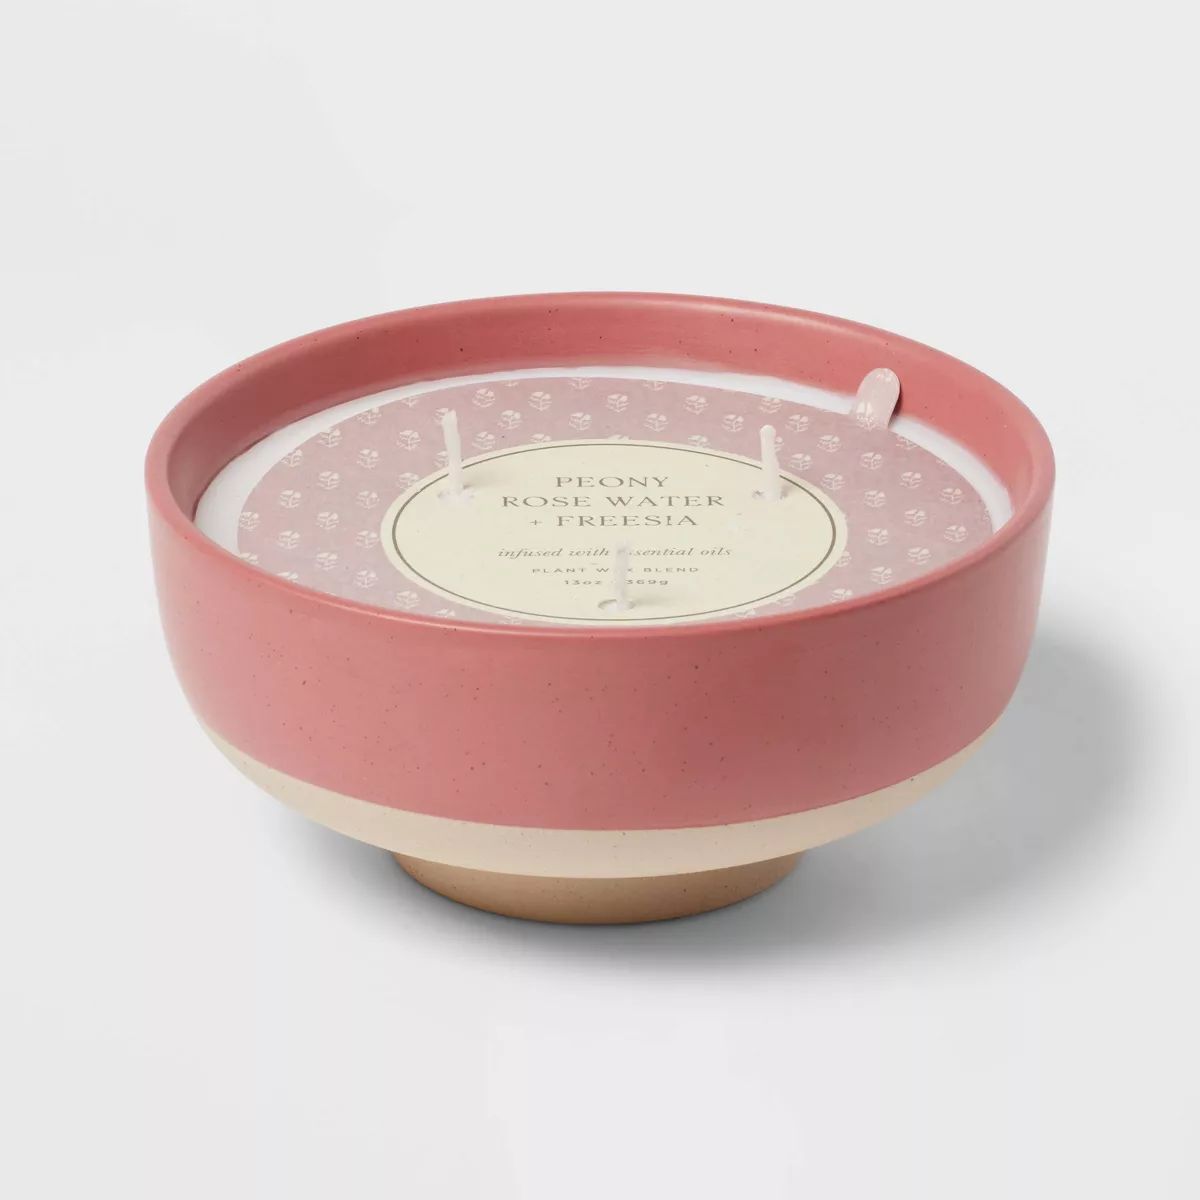 3-Wick Textured Ceramic Peony Rose Water + Freesia Footed Jar Candle Pink 13oz - Threshold™ | Target